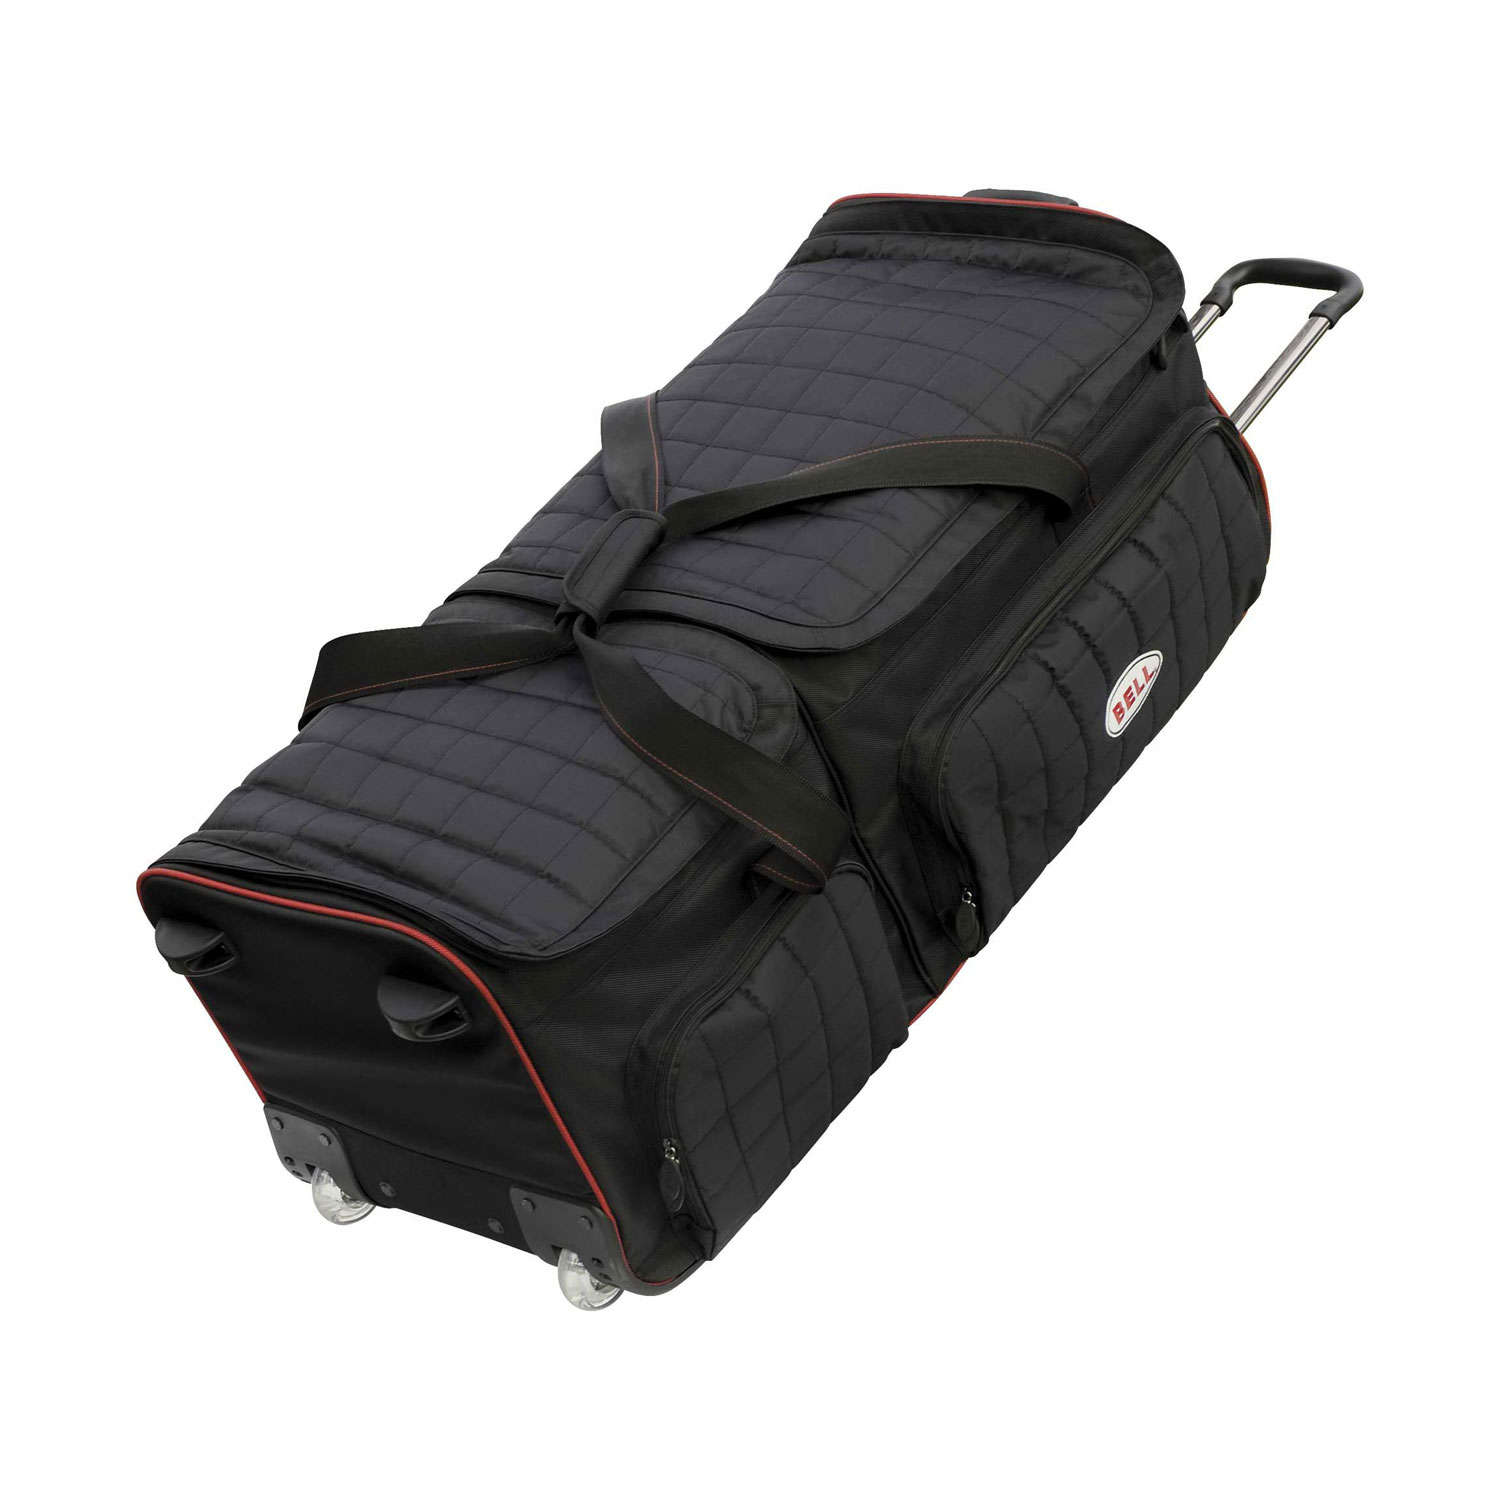 Bell Trolley Large travel bag | Accessories \ Luggage \ Bags Shop by ...